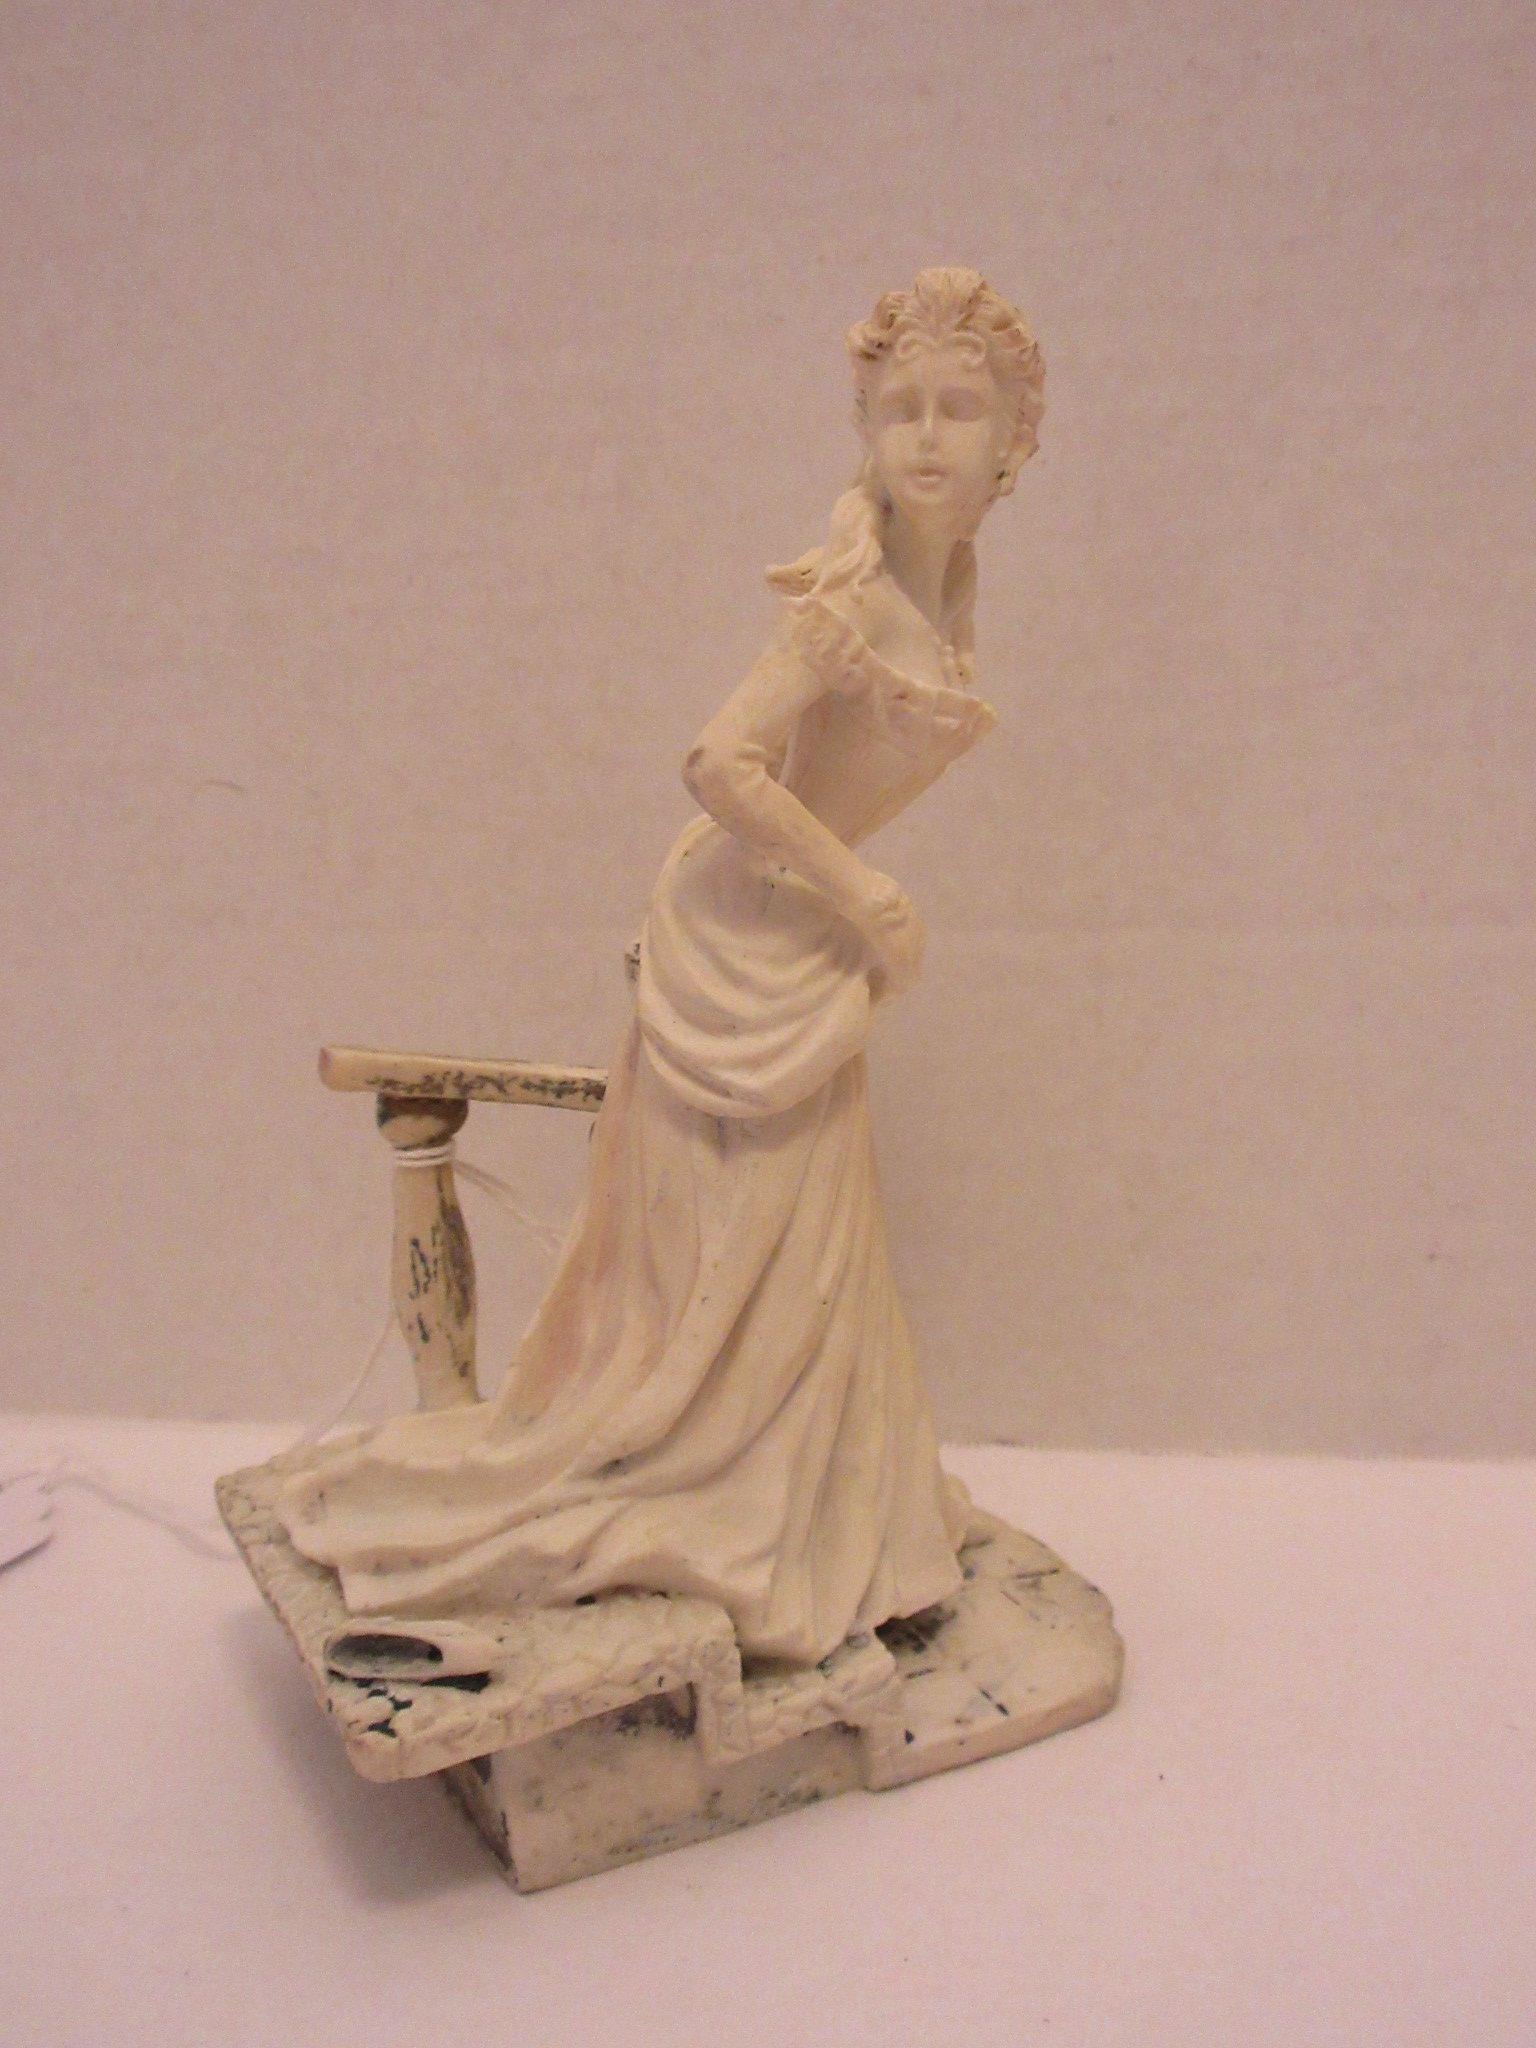 Vintage Parian Ware Figurine of Cinderella leaving the ball - slipper at her foot - 7" Tall